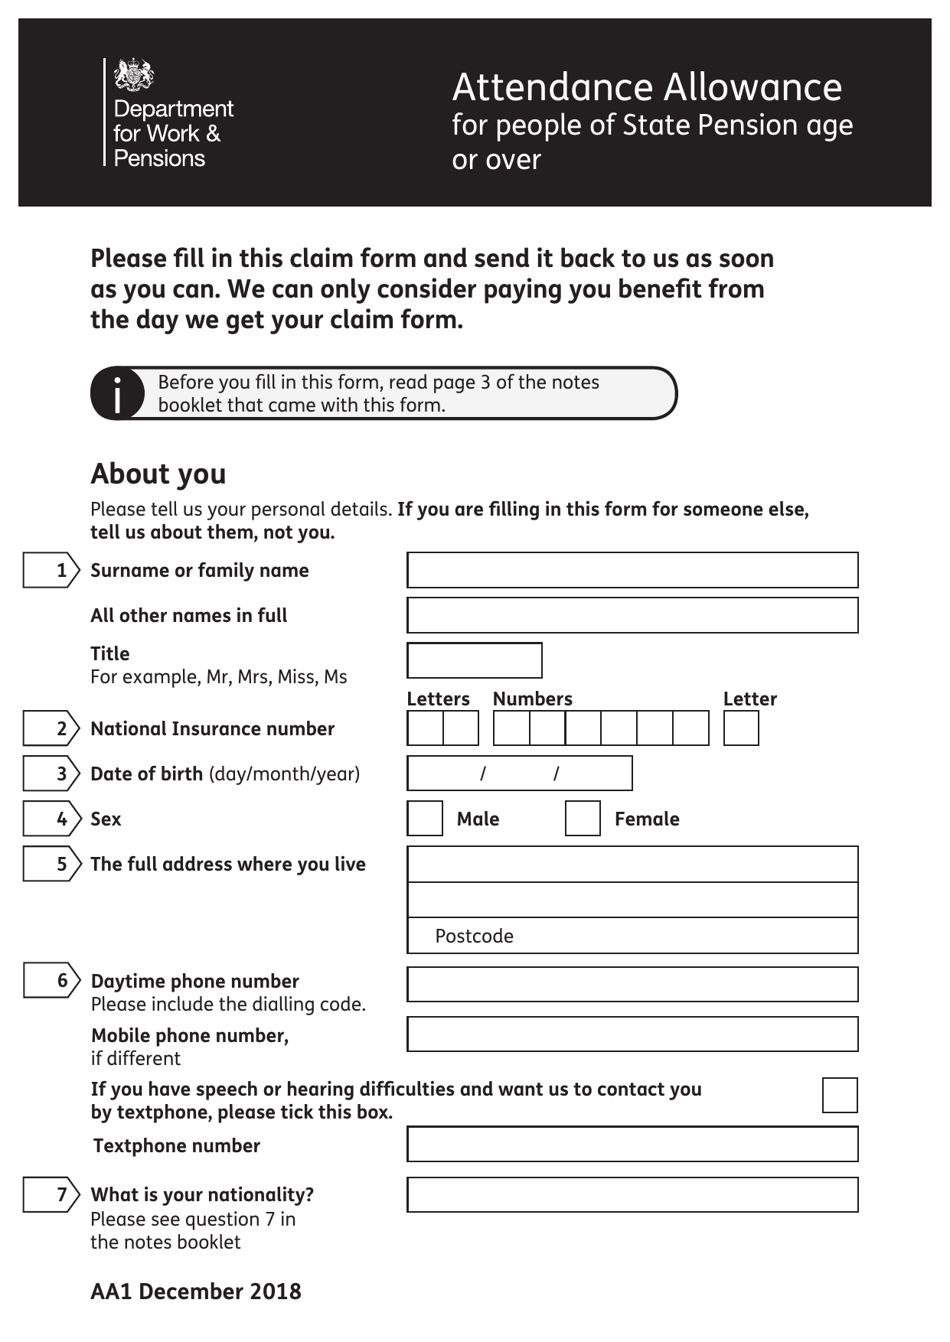 Form AA1 Attendance Allowance for People of State Pension Age or Over - United Kingdom, Page 1